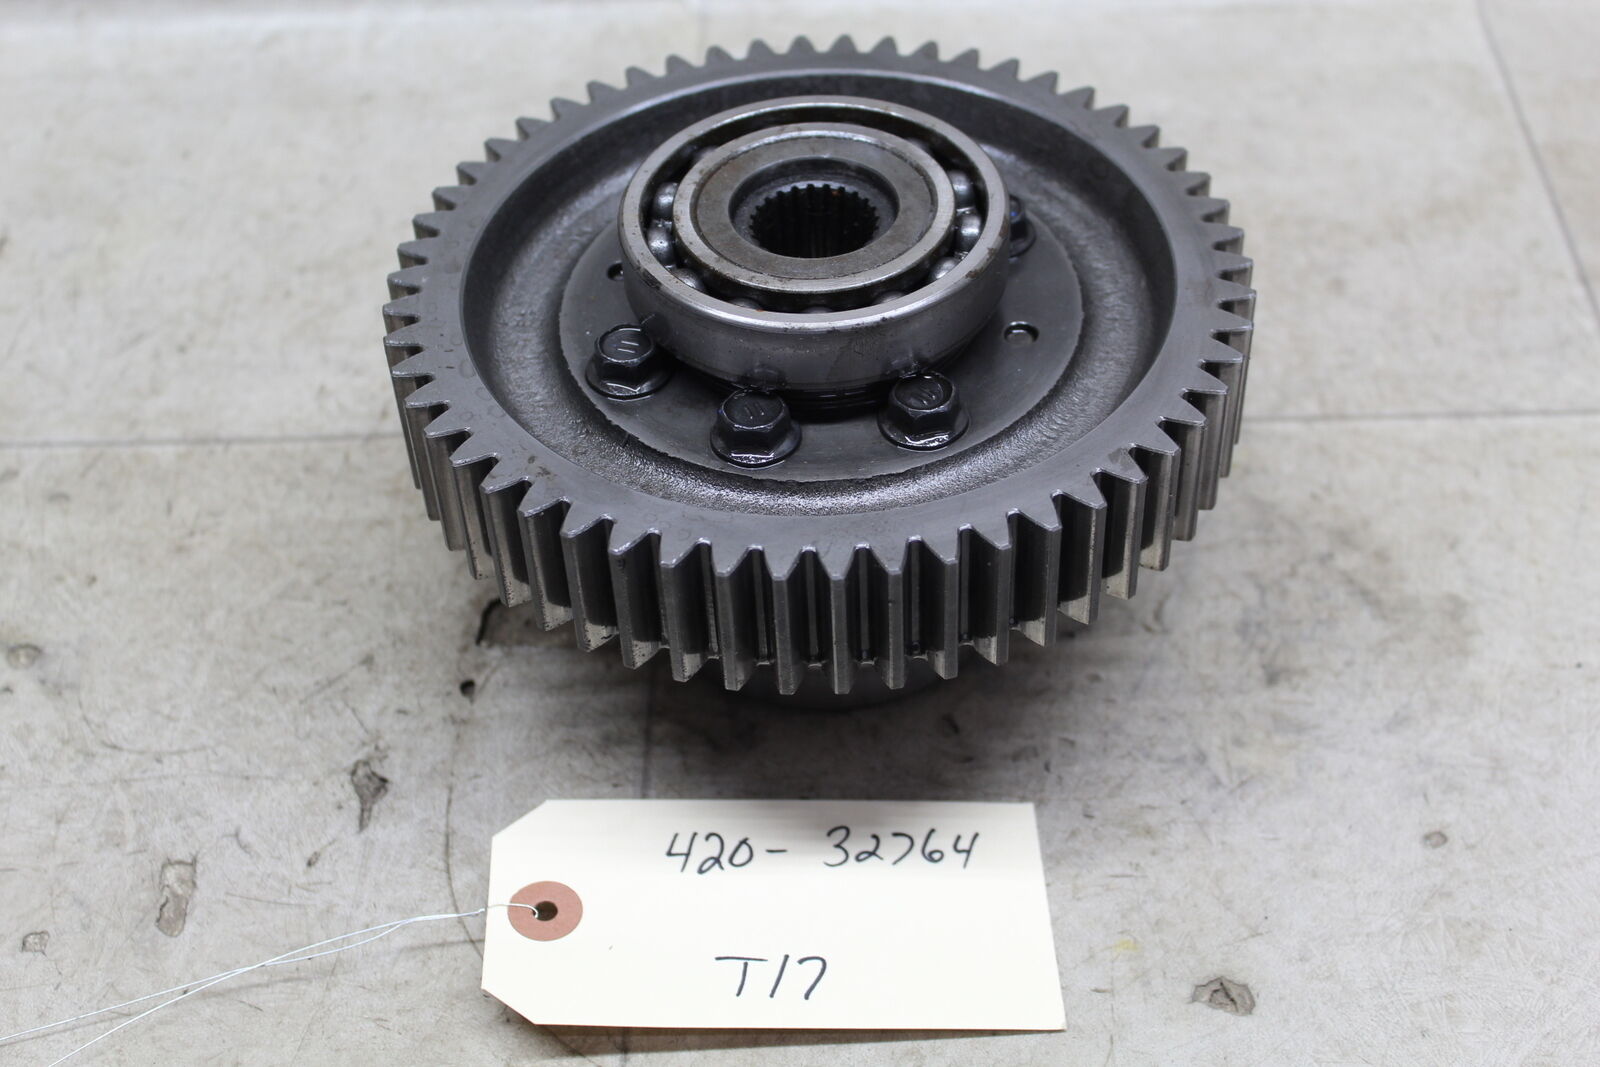 2013 Kubota Rtv400 Rear Back Differential Diff Ring Gear Spider Gears Assembly